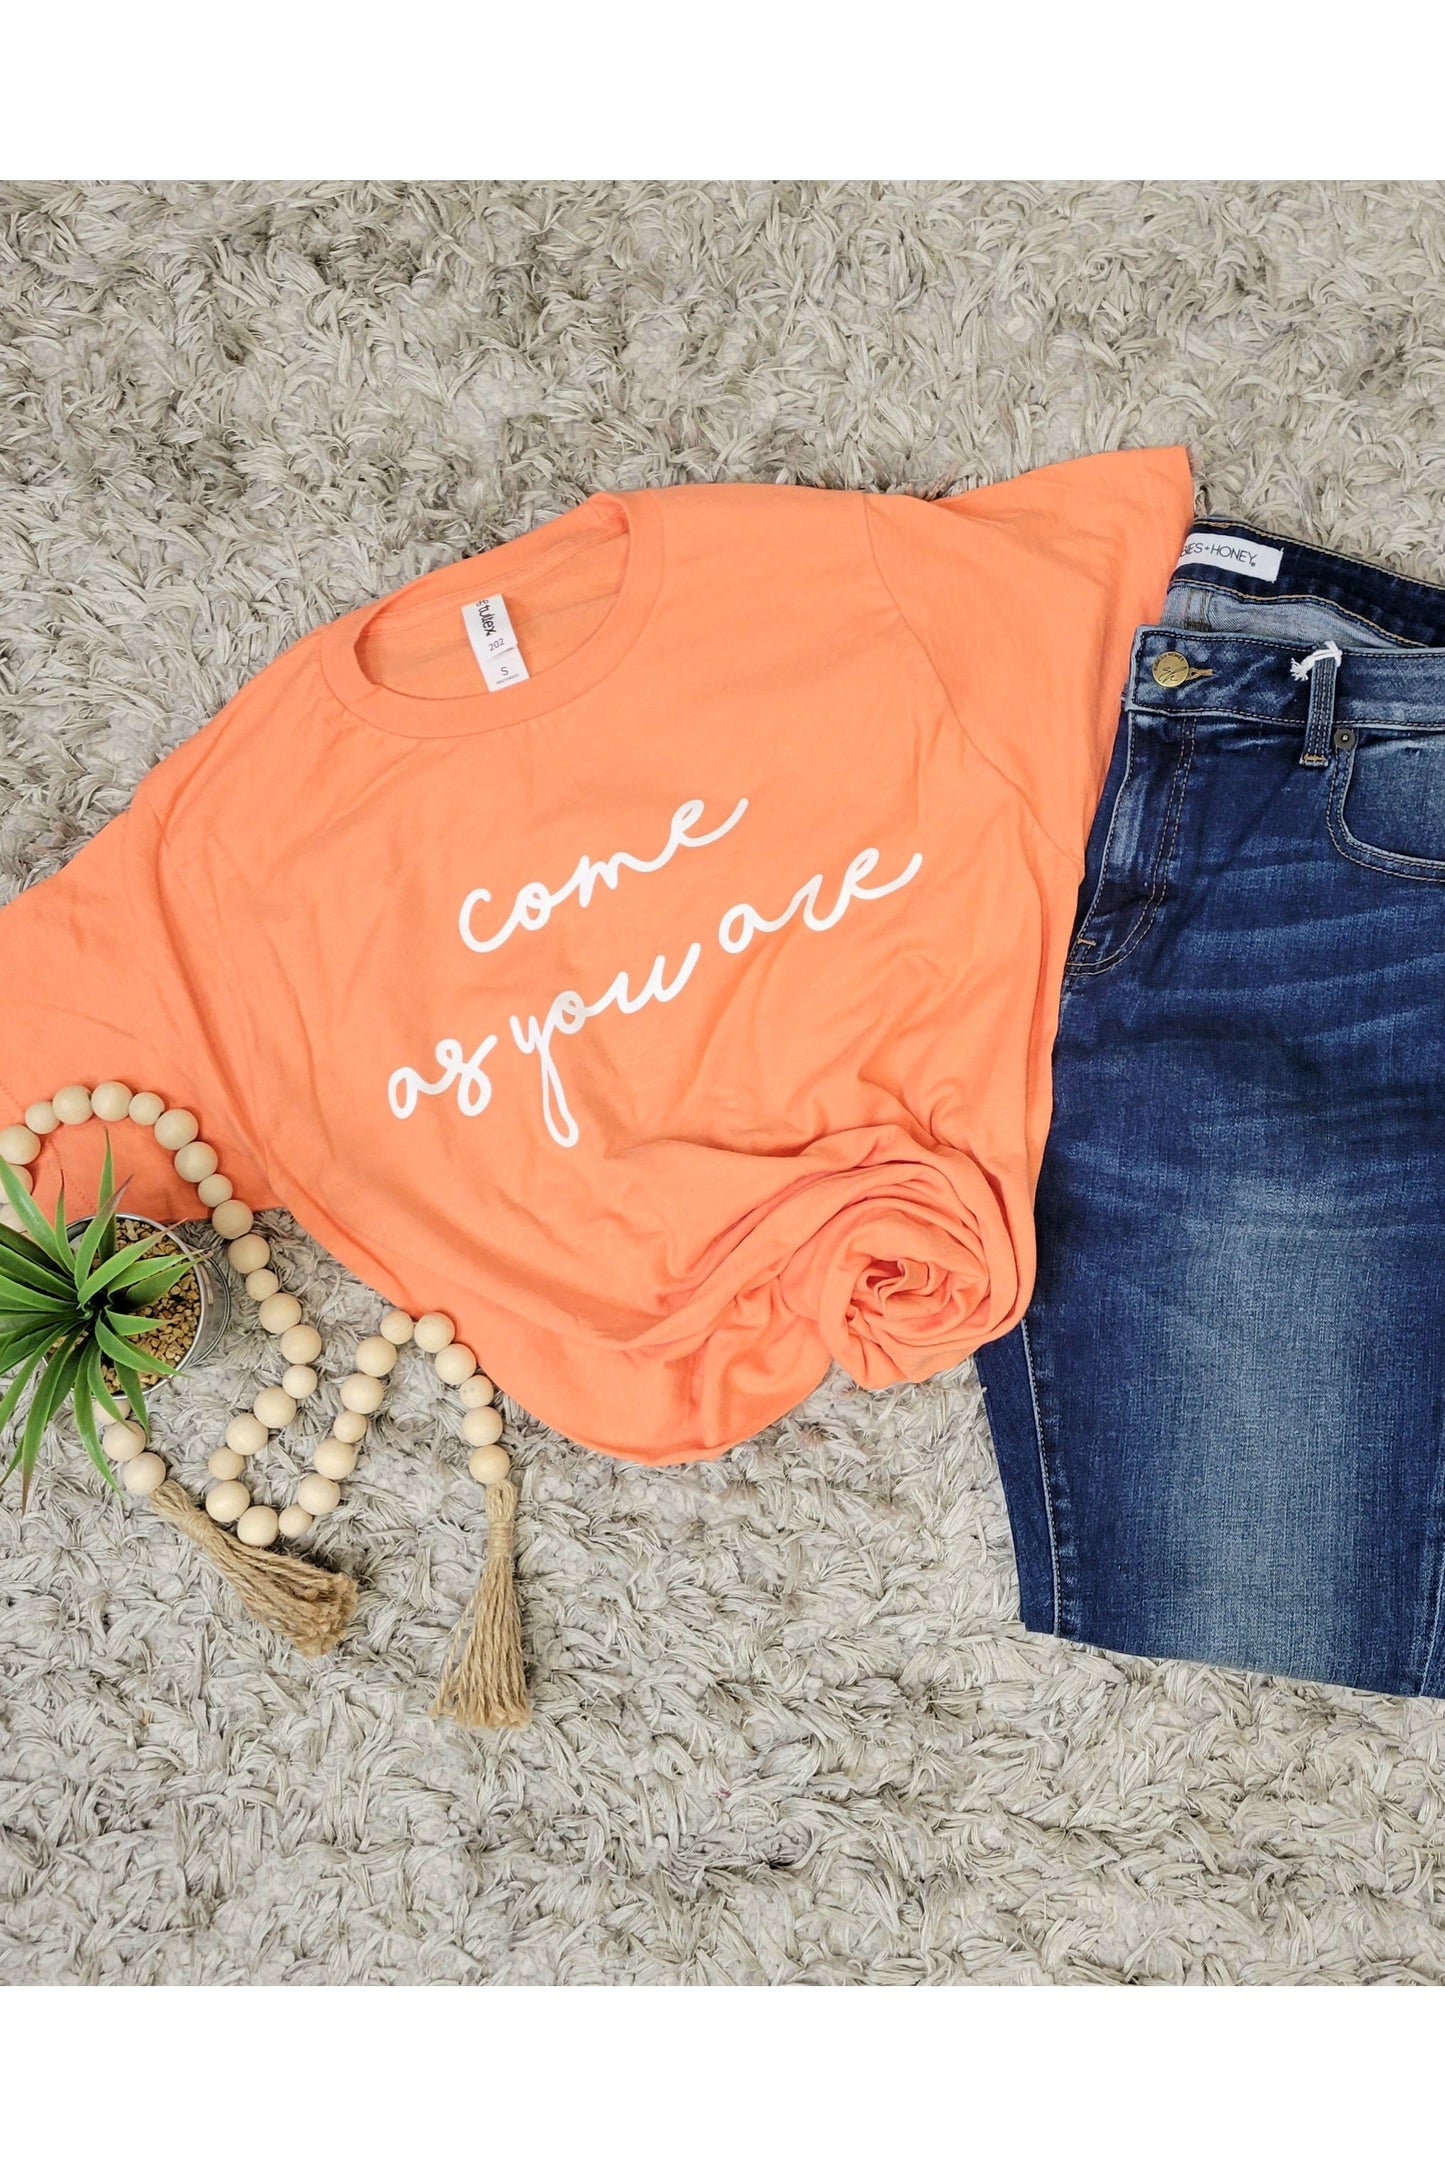 Come As You Are Graphic Tee-Graphic Tee-Revive Boutique & Floral-Small-Revive Boutique